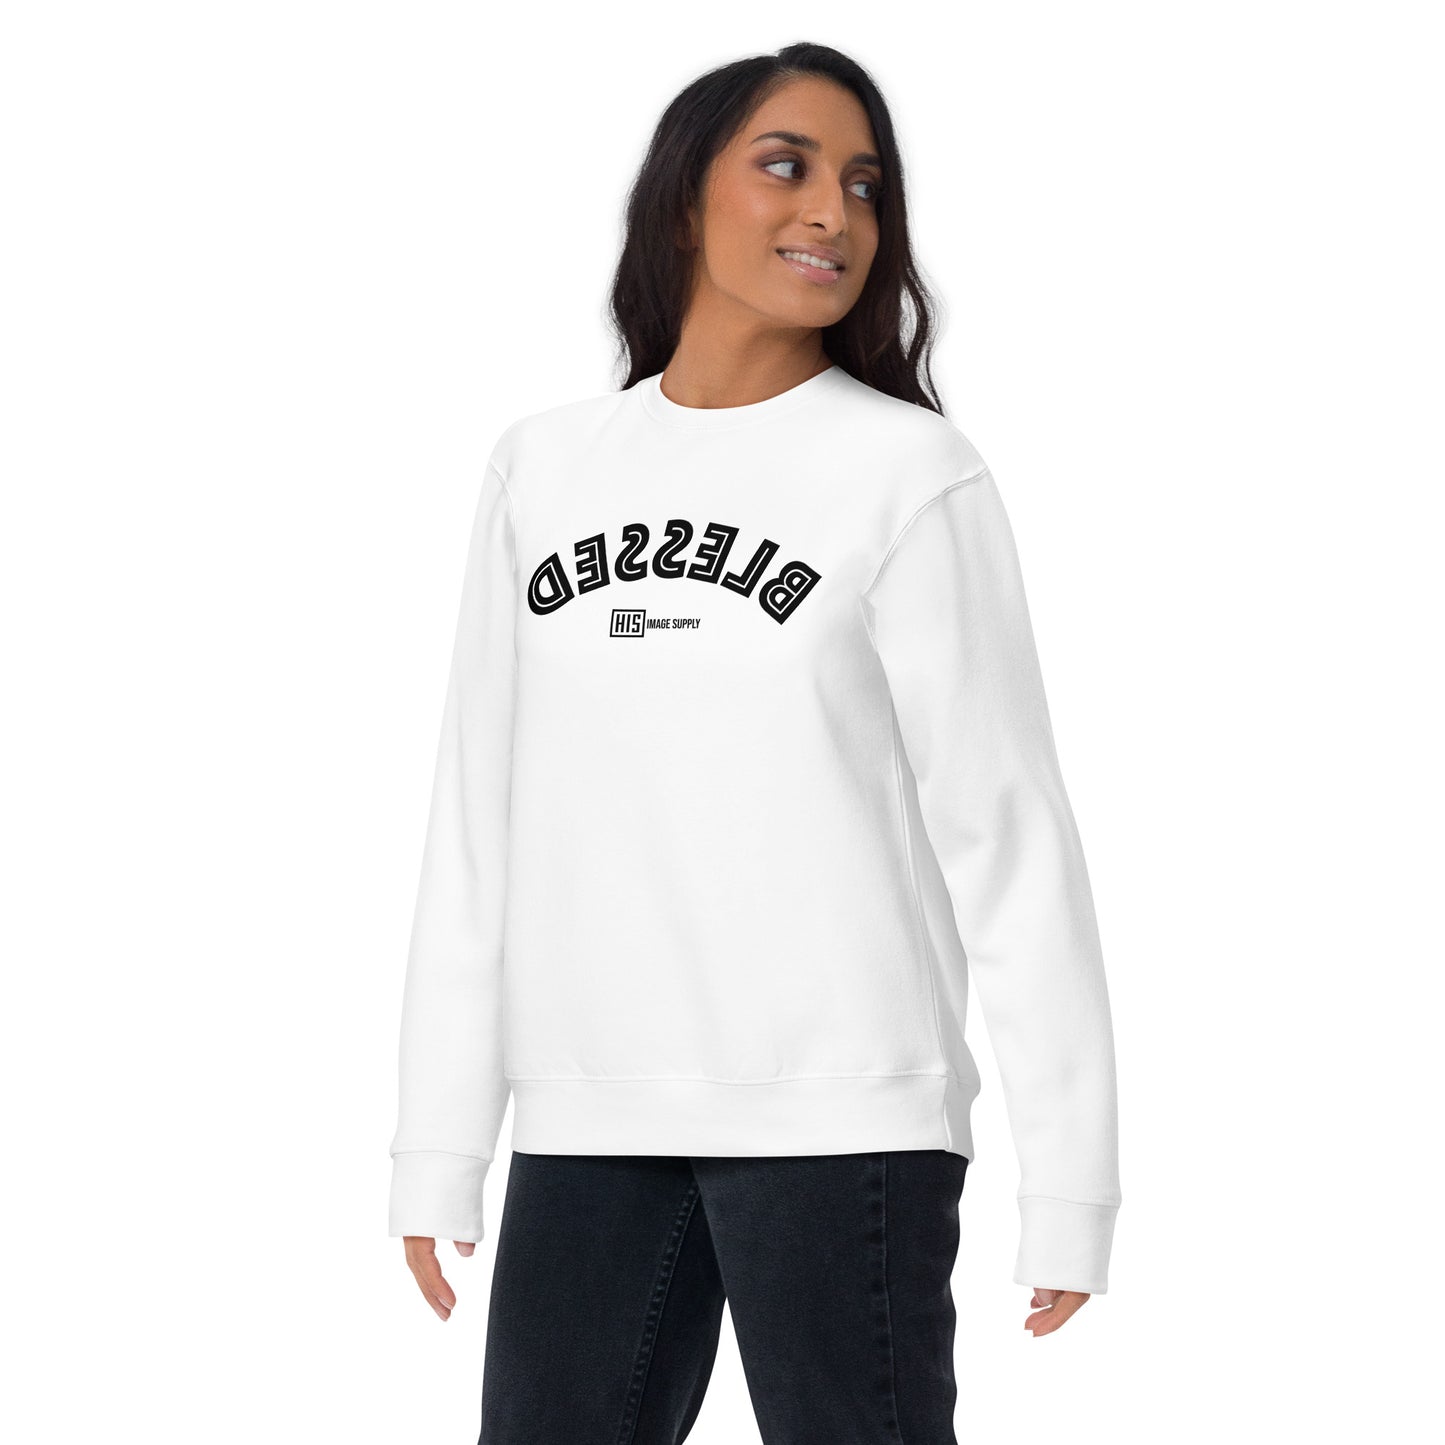 Blessed Curved Reflection Sweatshirt